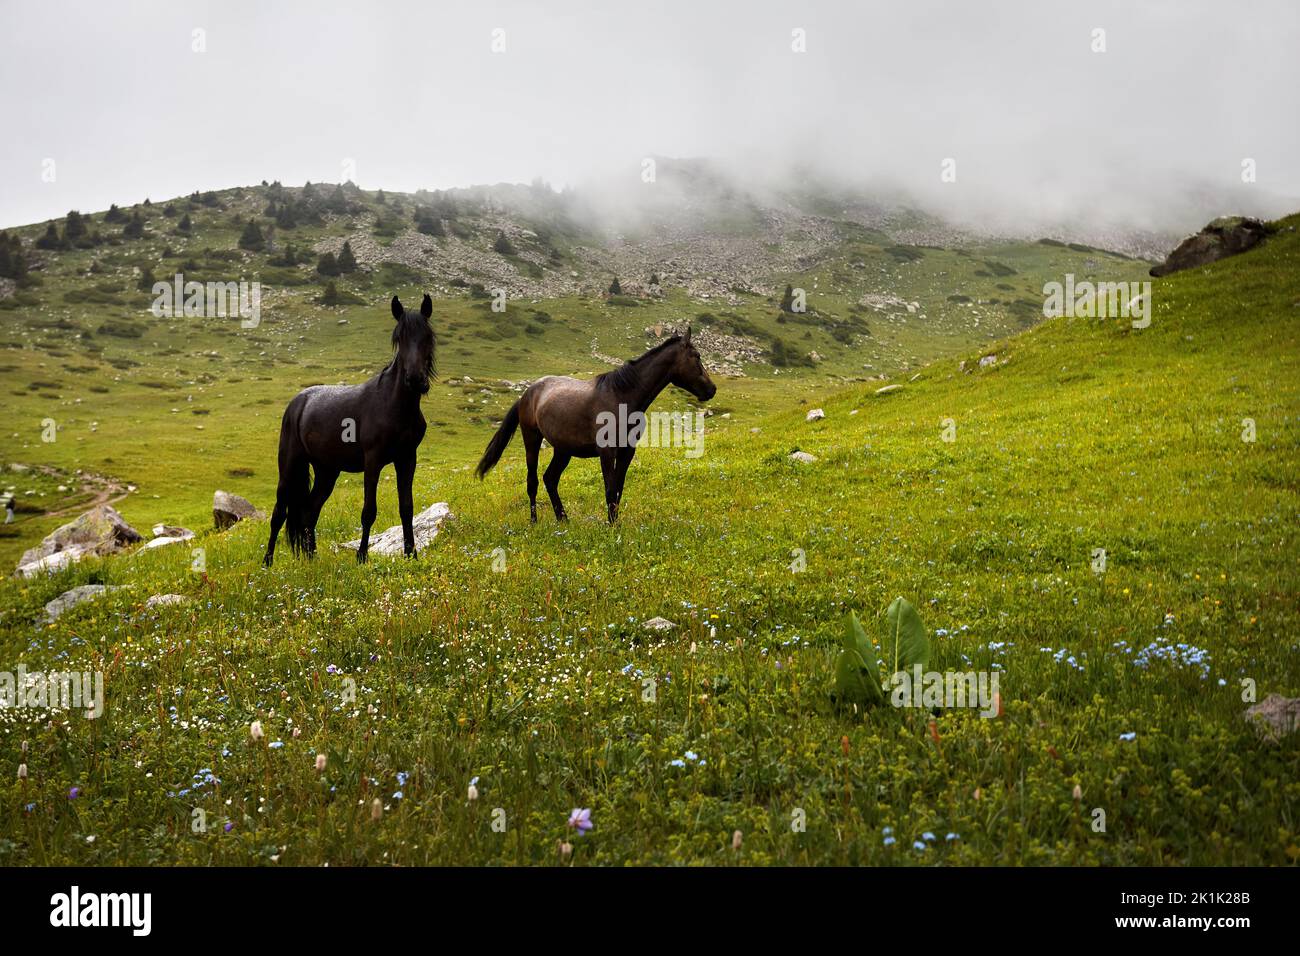 Two Black Horses at green hills in Tian Shan mountains of Kazakhstan, Central Asia. Wild animal outdoor at rain and fog Stock Photo